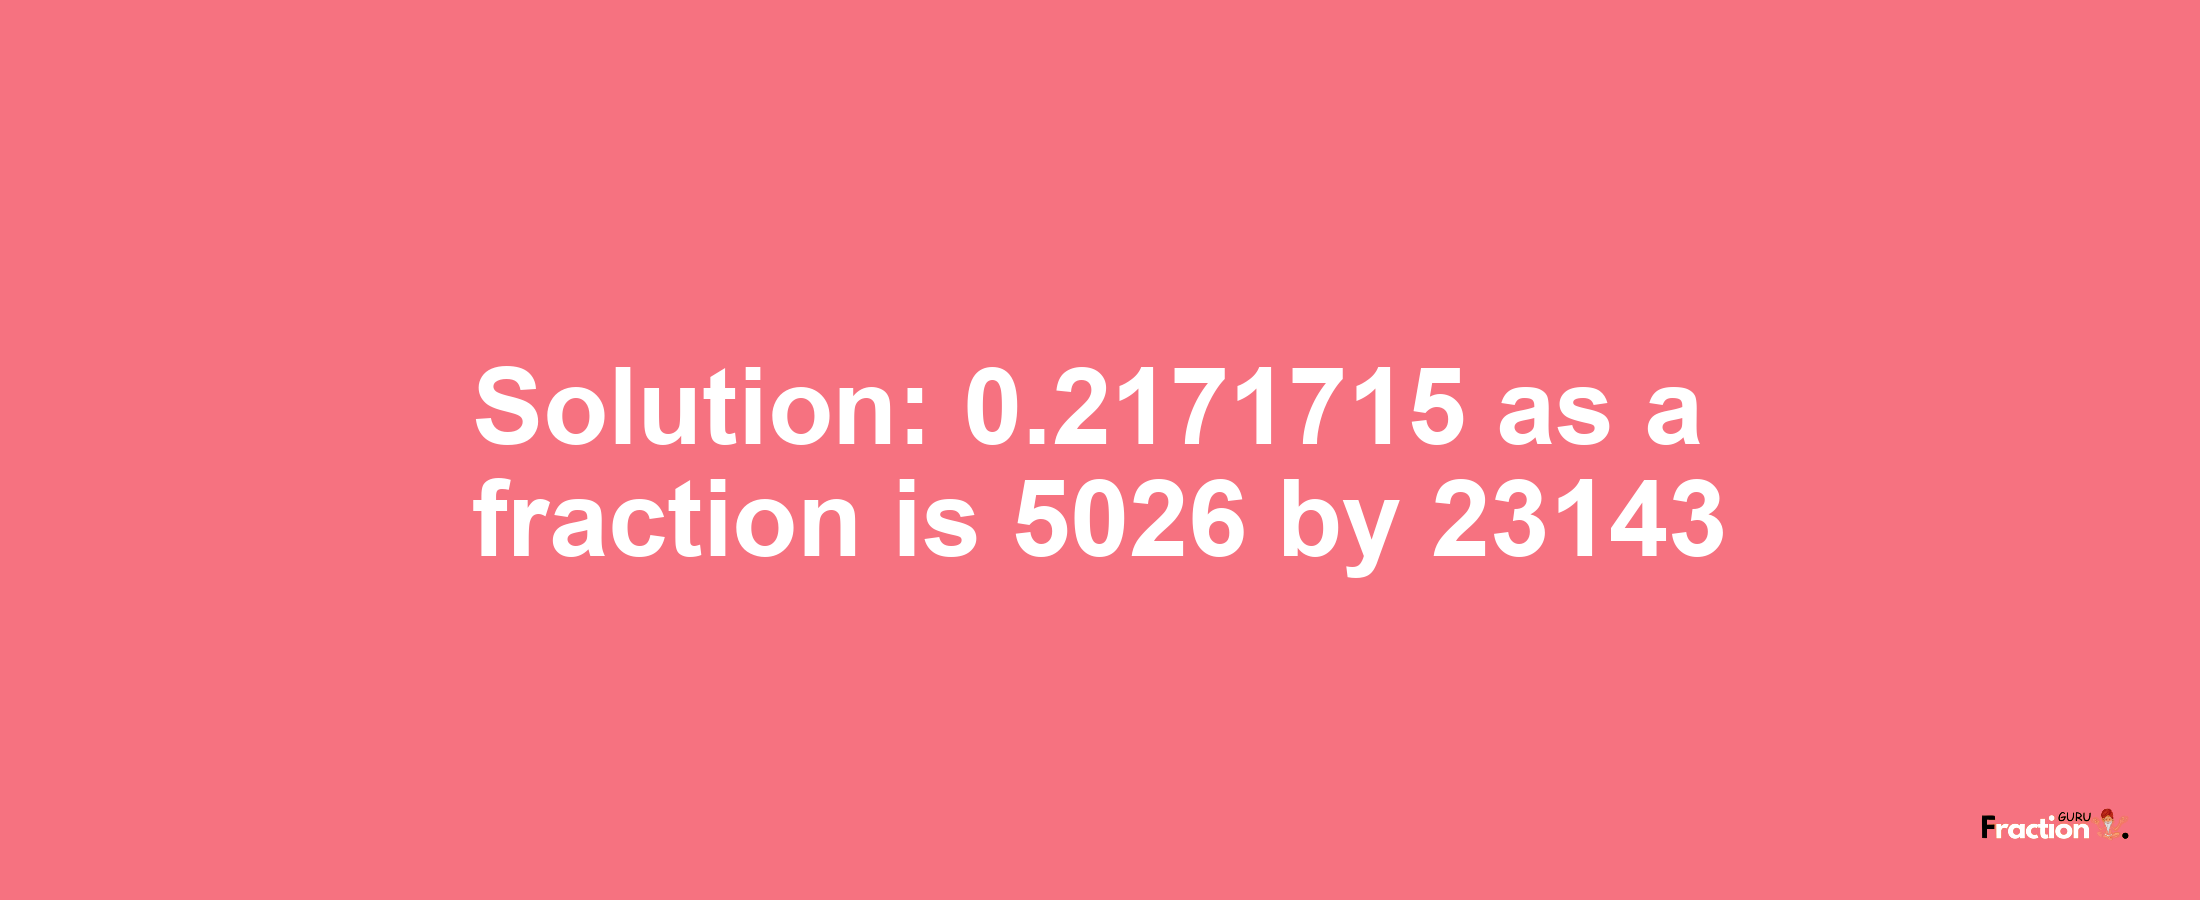 Solution:0.2171715 as a fraction is 5026/23143